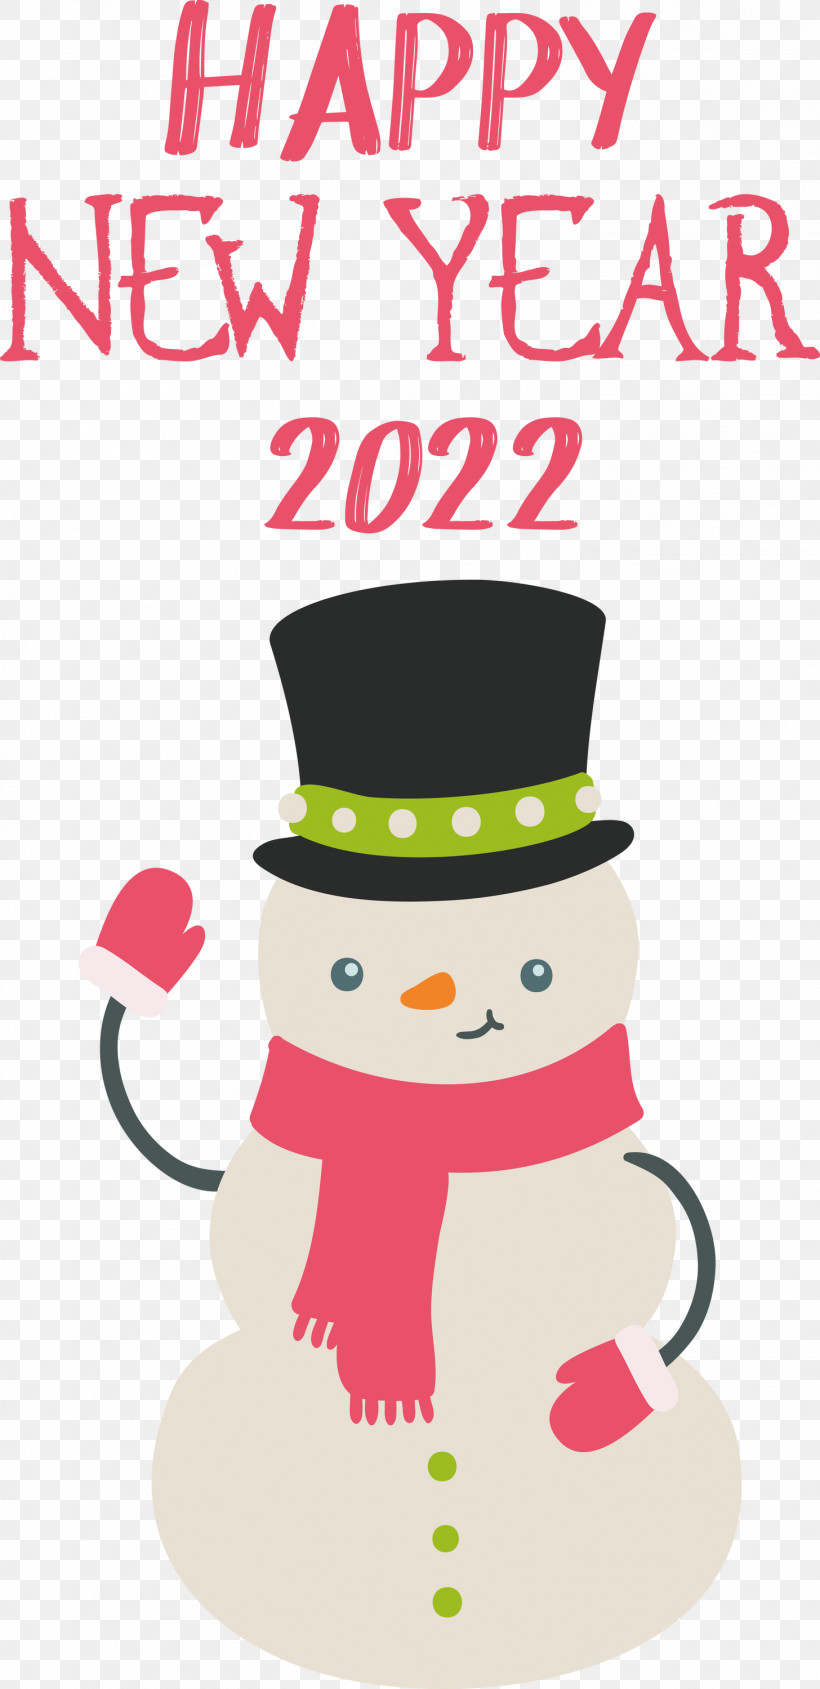 Happy New Year 2022 2022 New Year 2022, PNG, 1456x3000px, Christmas Day, Bauble, Cartoon, Character, Christmas Tree Download Free